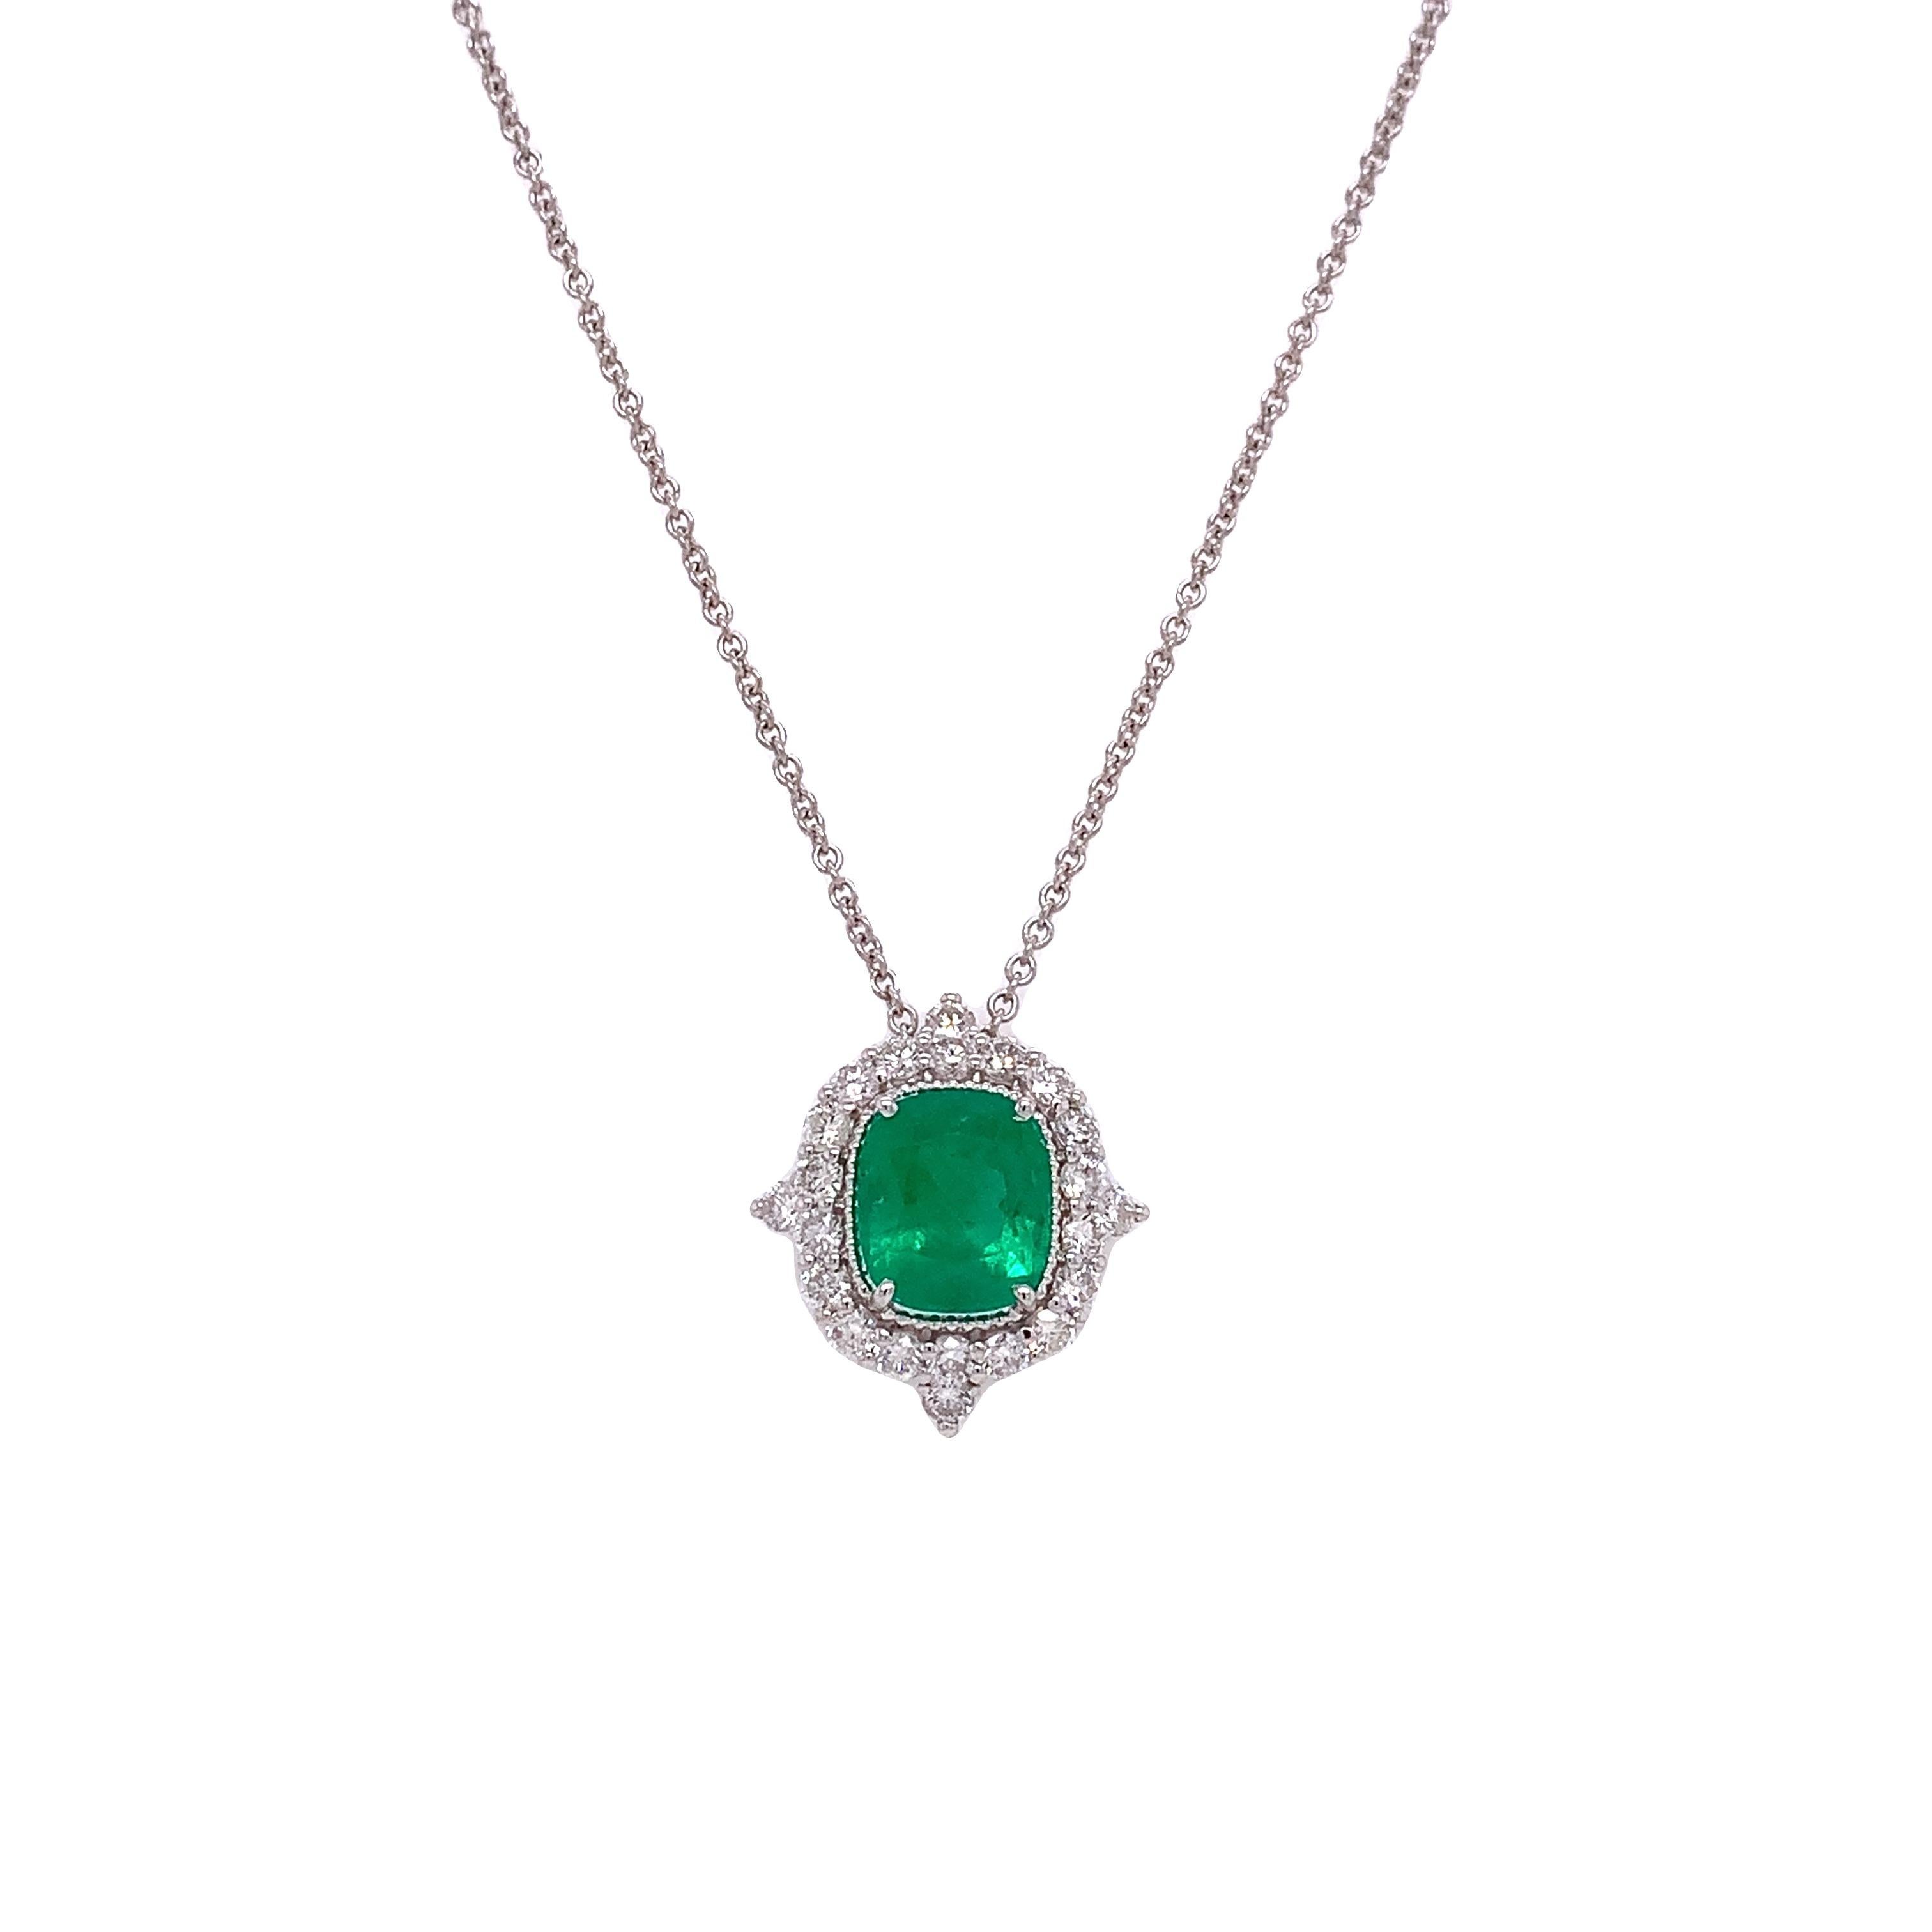 18K White Gold
Emerald: 1.82ct total weight
Diamond: 0.69ct total weight
All diamonds are G-H/ SI stones.
Chain Length: 16in to 18in